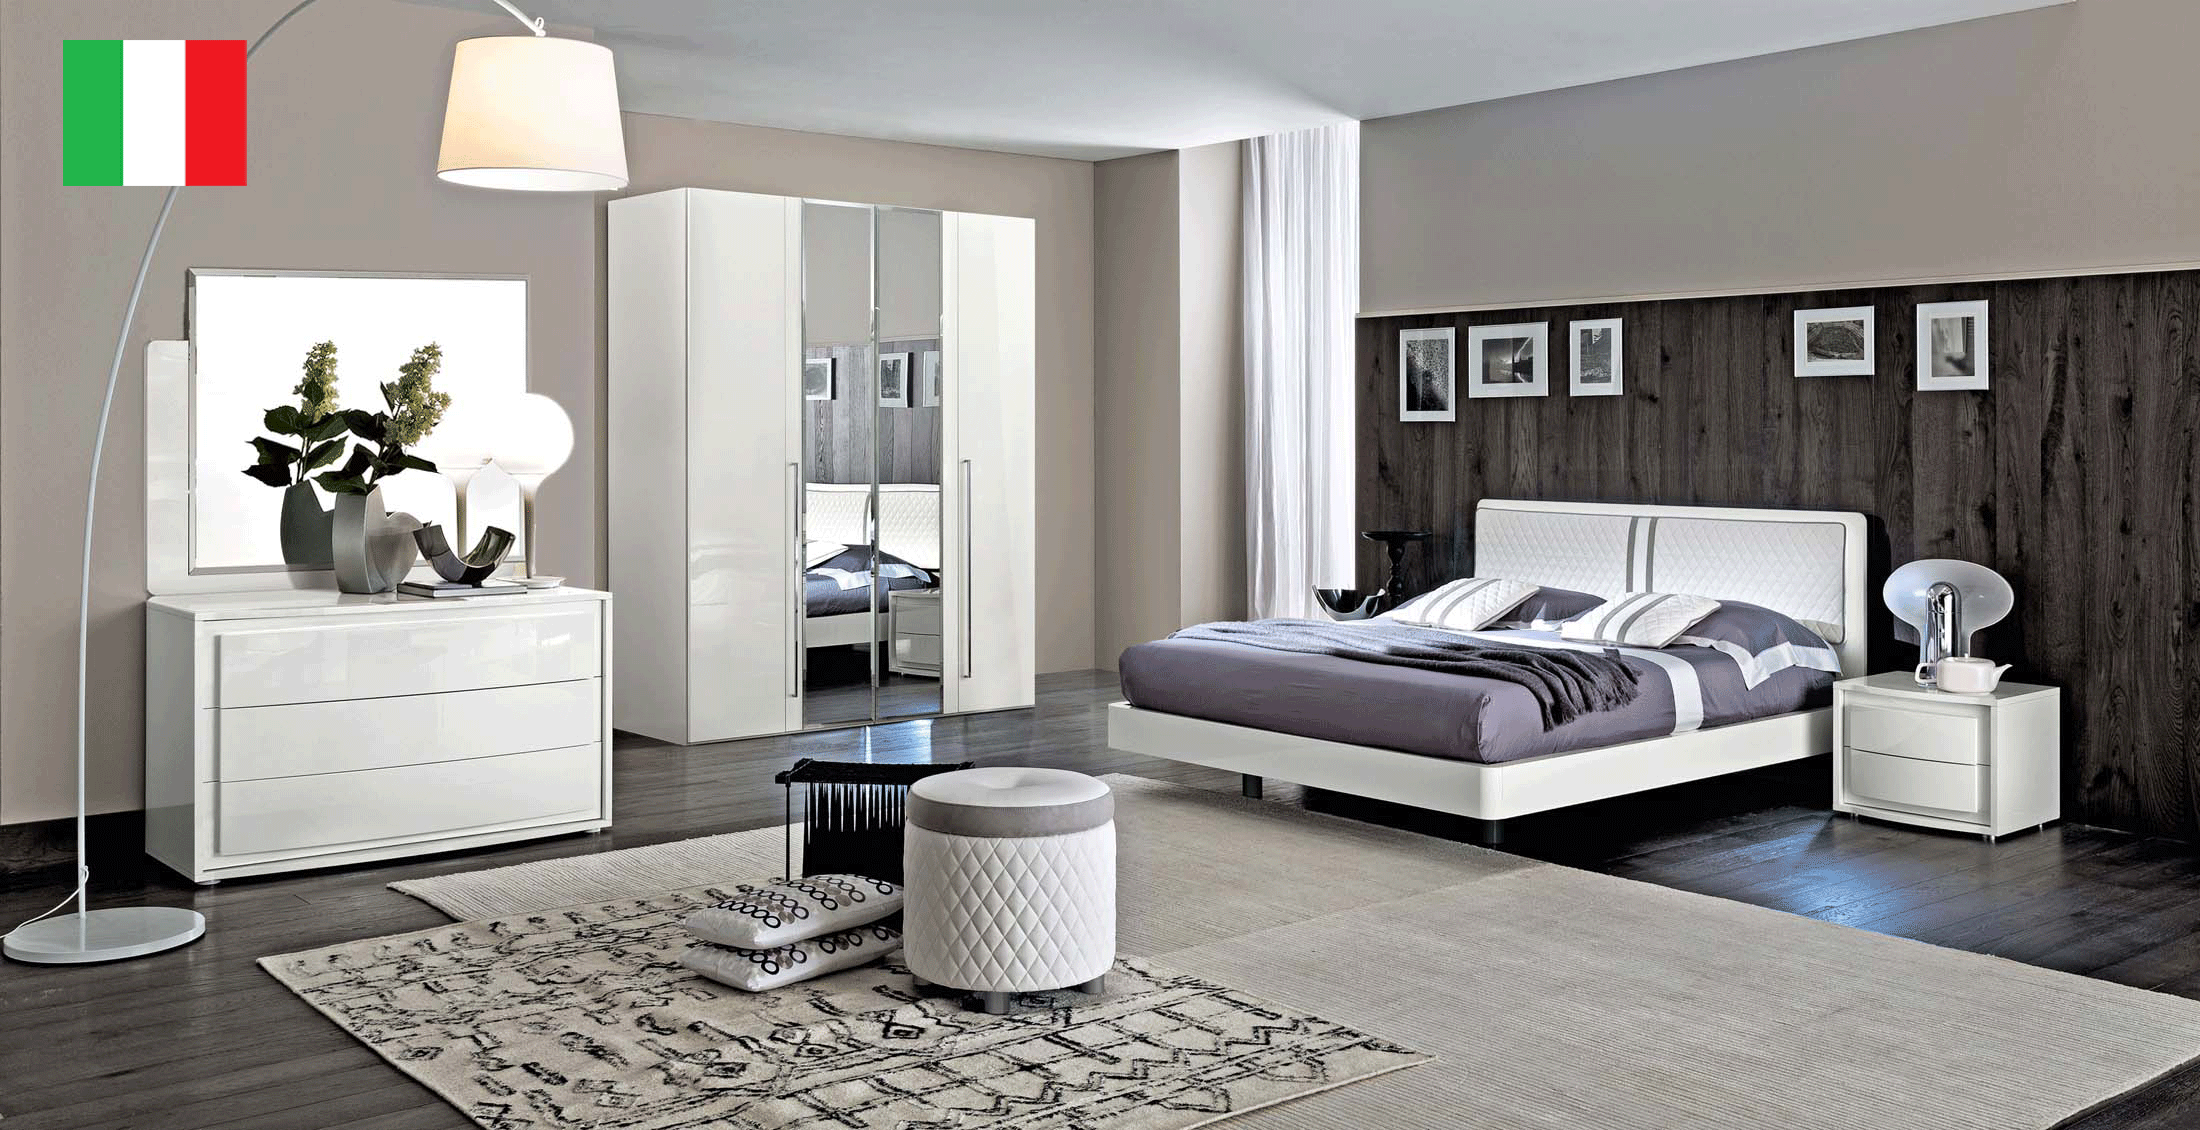 Clearance Bedroom Dama Bianca Bedroom by CamelGroup Italy